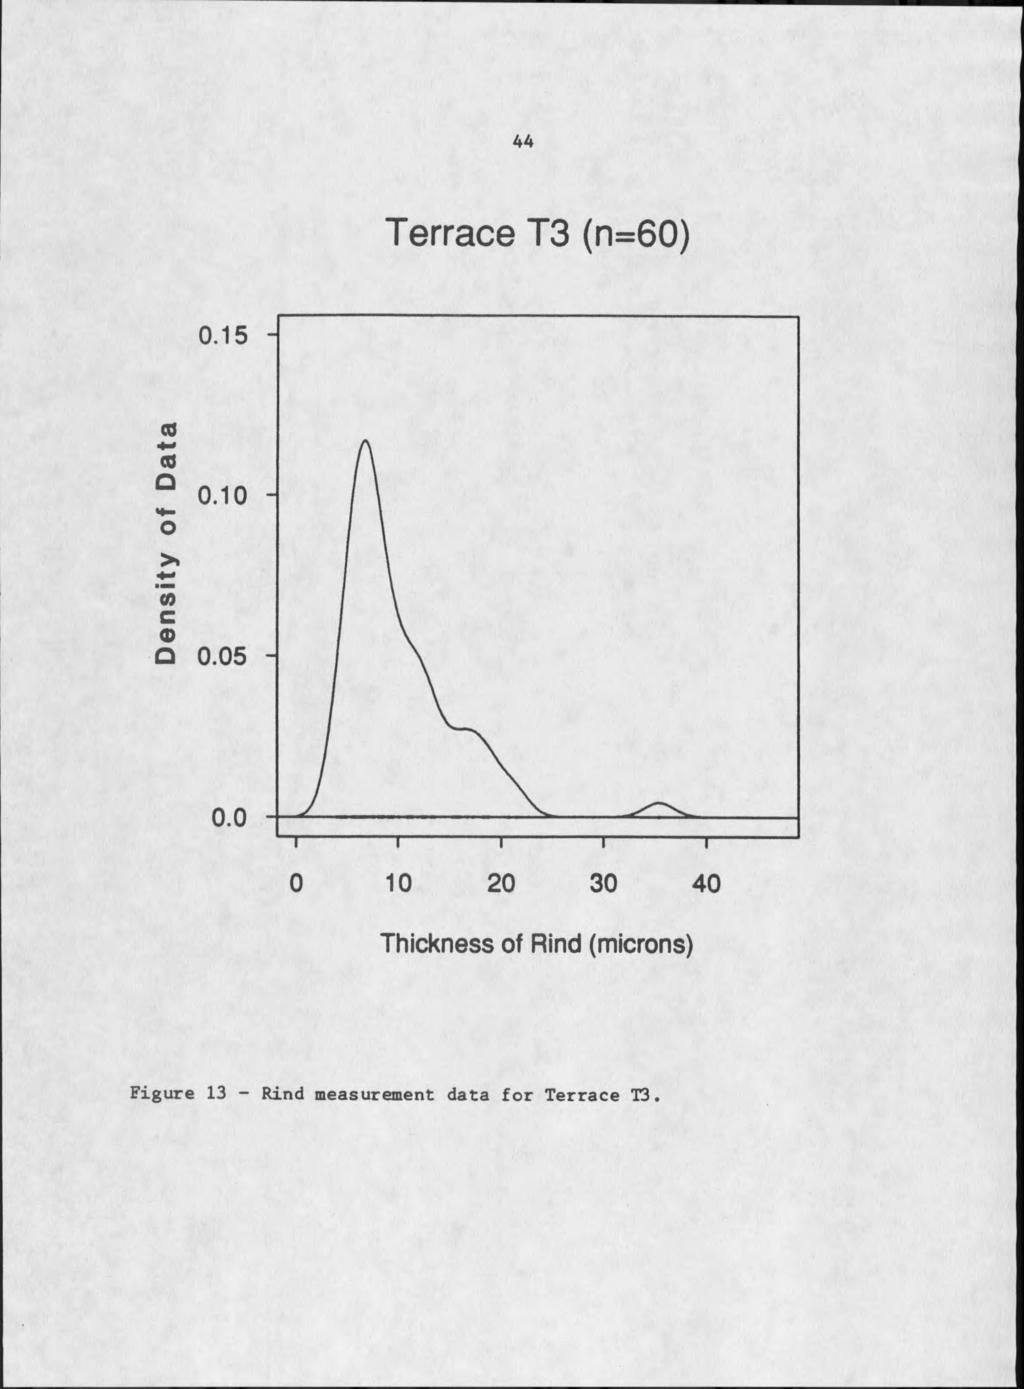 44 Terrace T3 (n=60) Thickness of Rind (microns) F